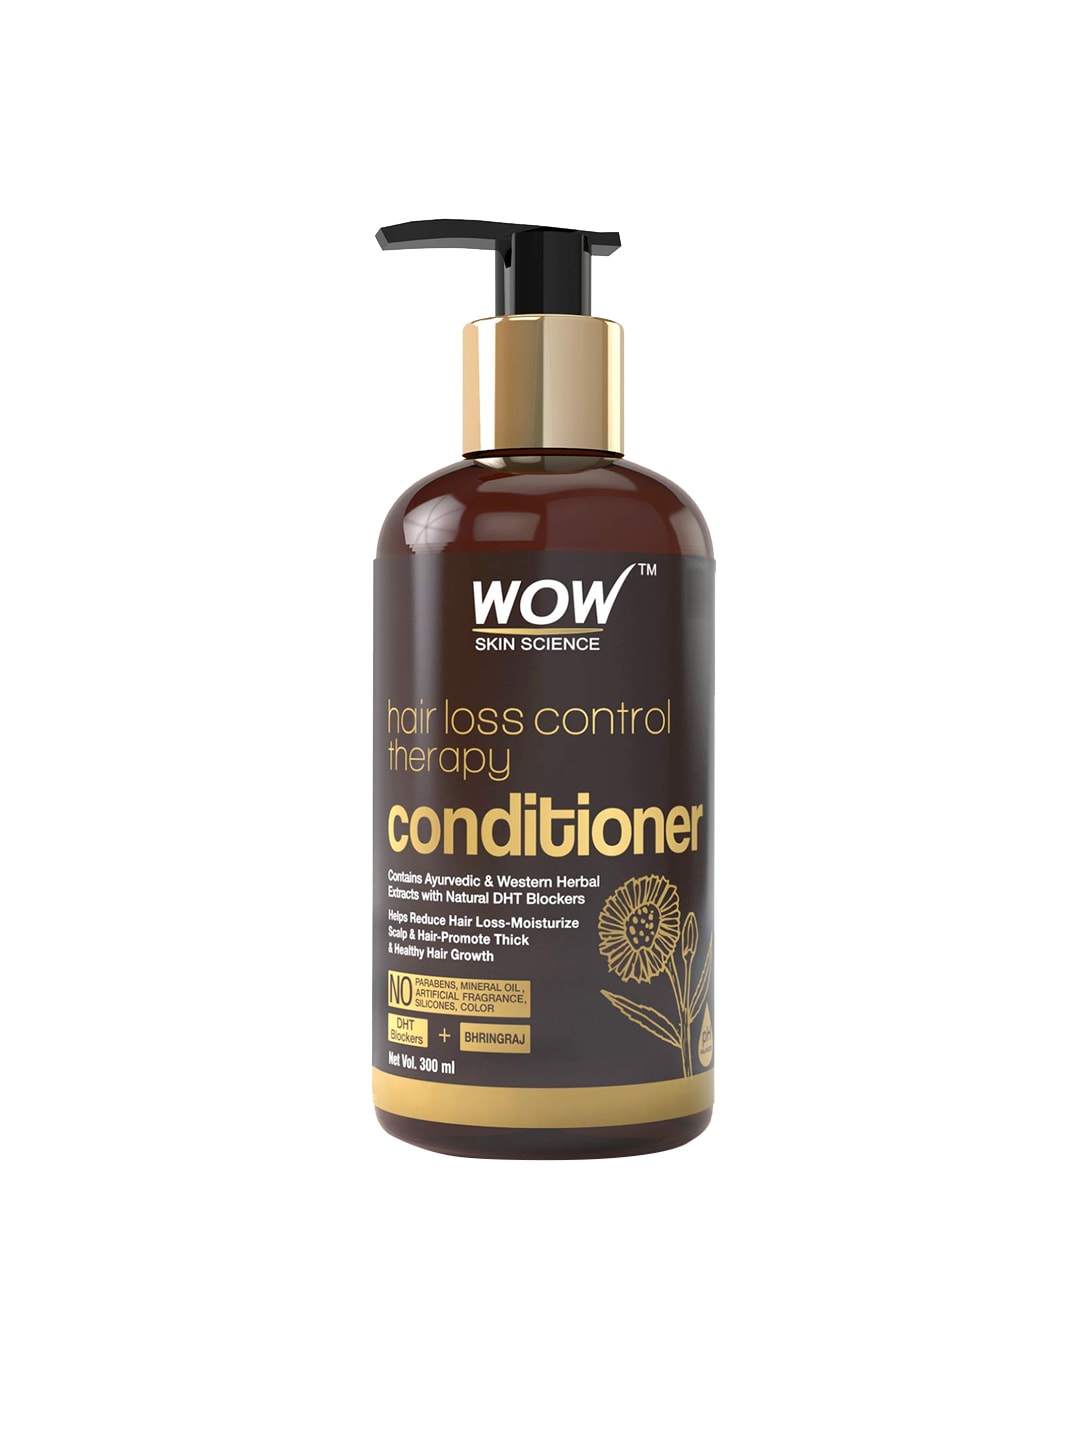 WOW SKIN SCIENCE Hair Loss Control Therapy Conditioner 300 ml Price in India